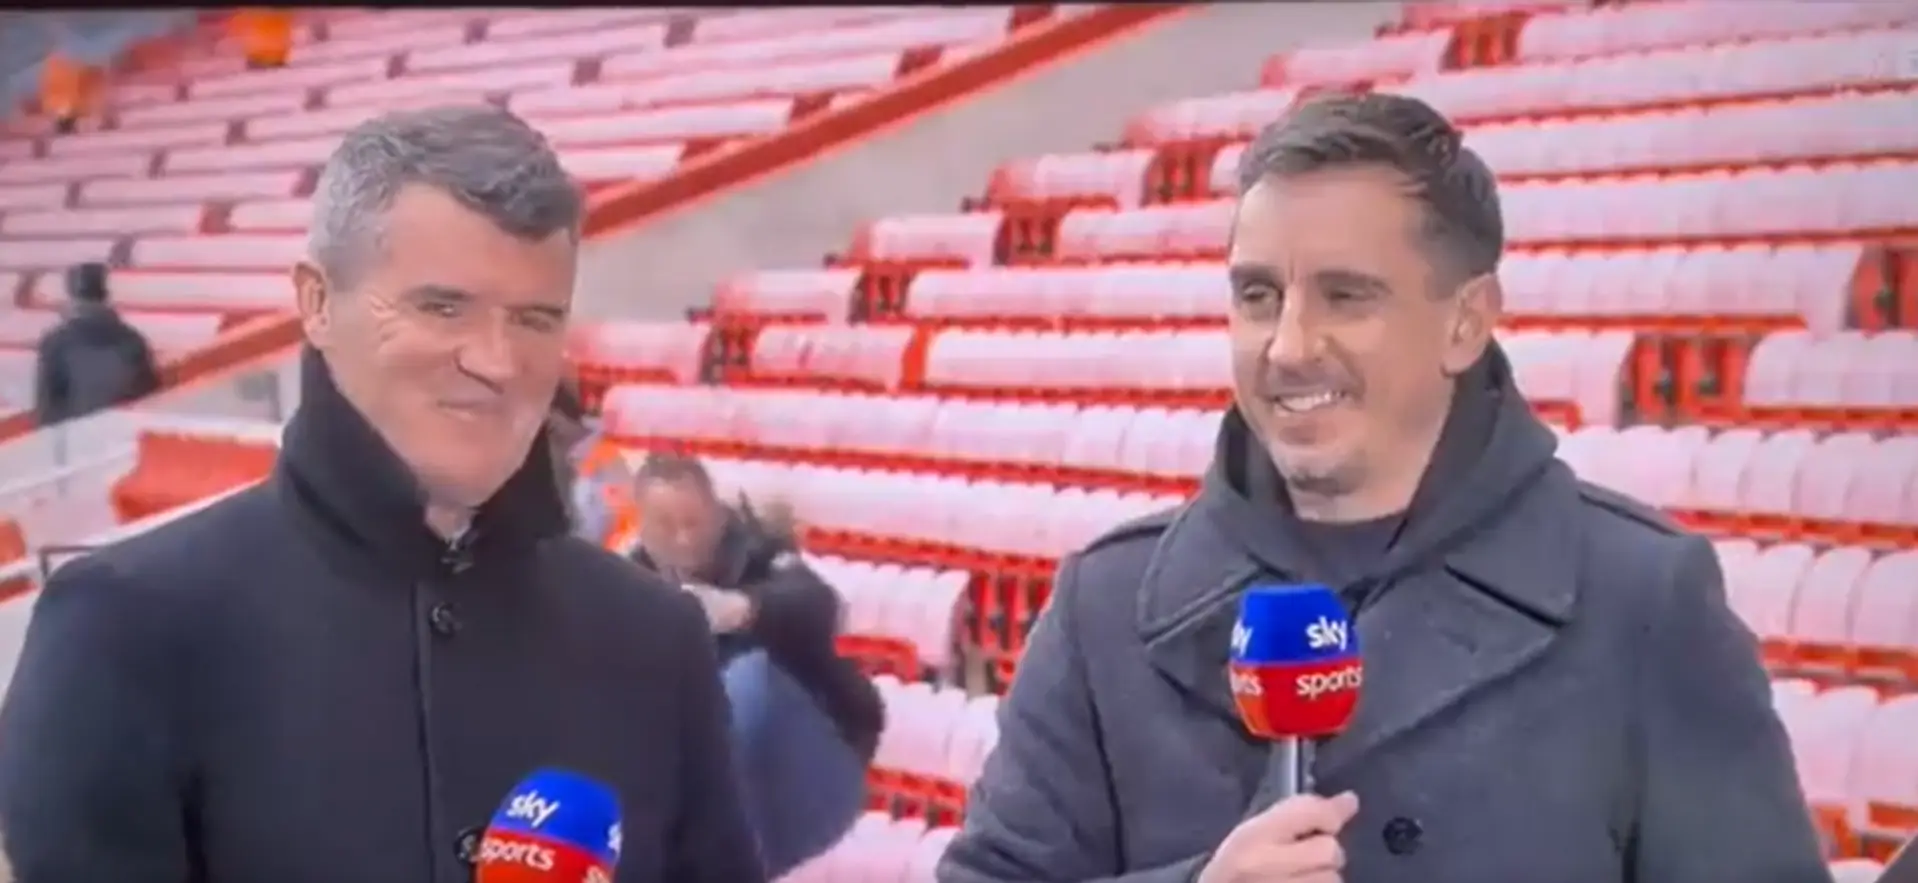 Keane and Neville laugh at Souness as he predicts confident Liverpool win over United - spotted